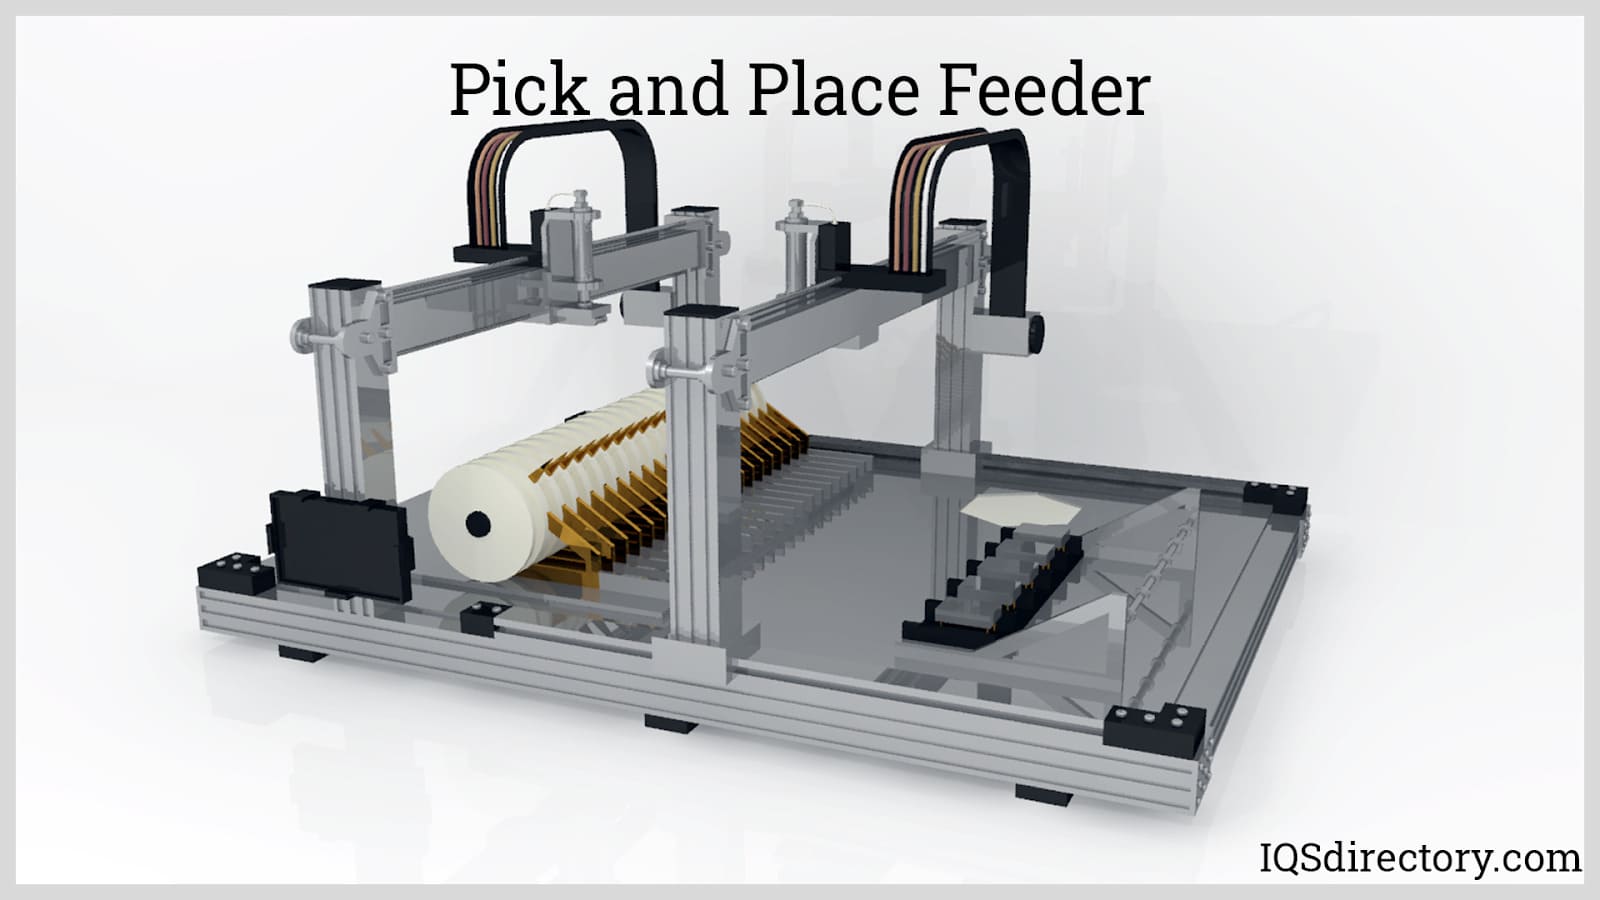 Pick and Place Feeder